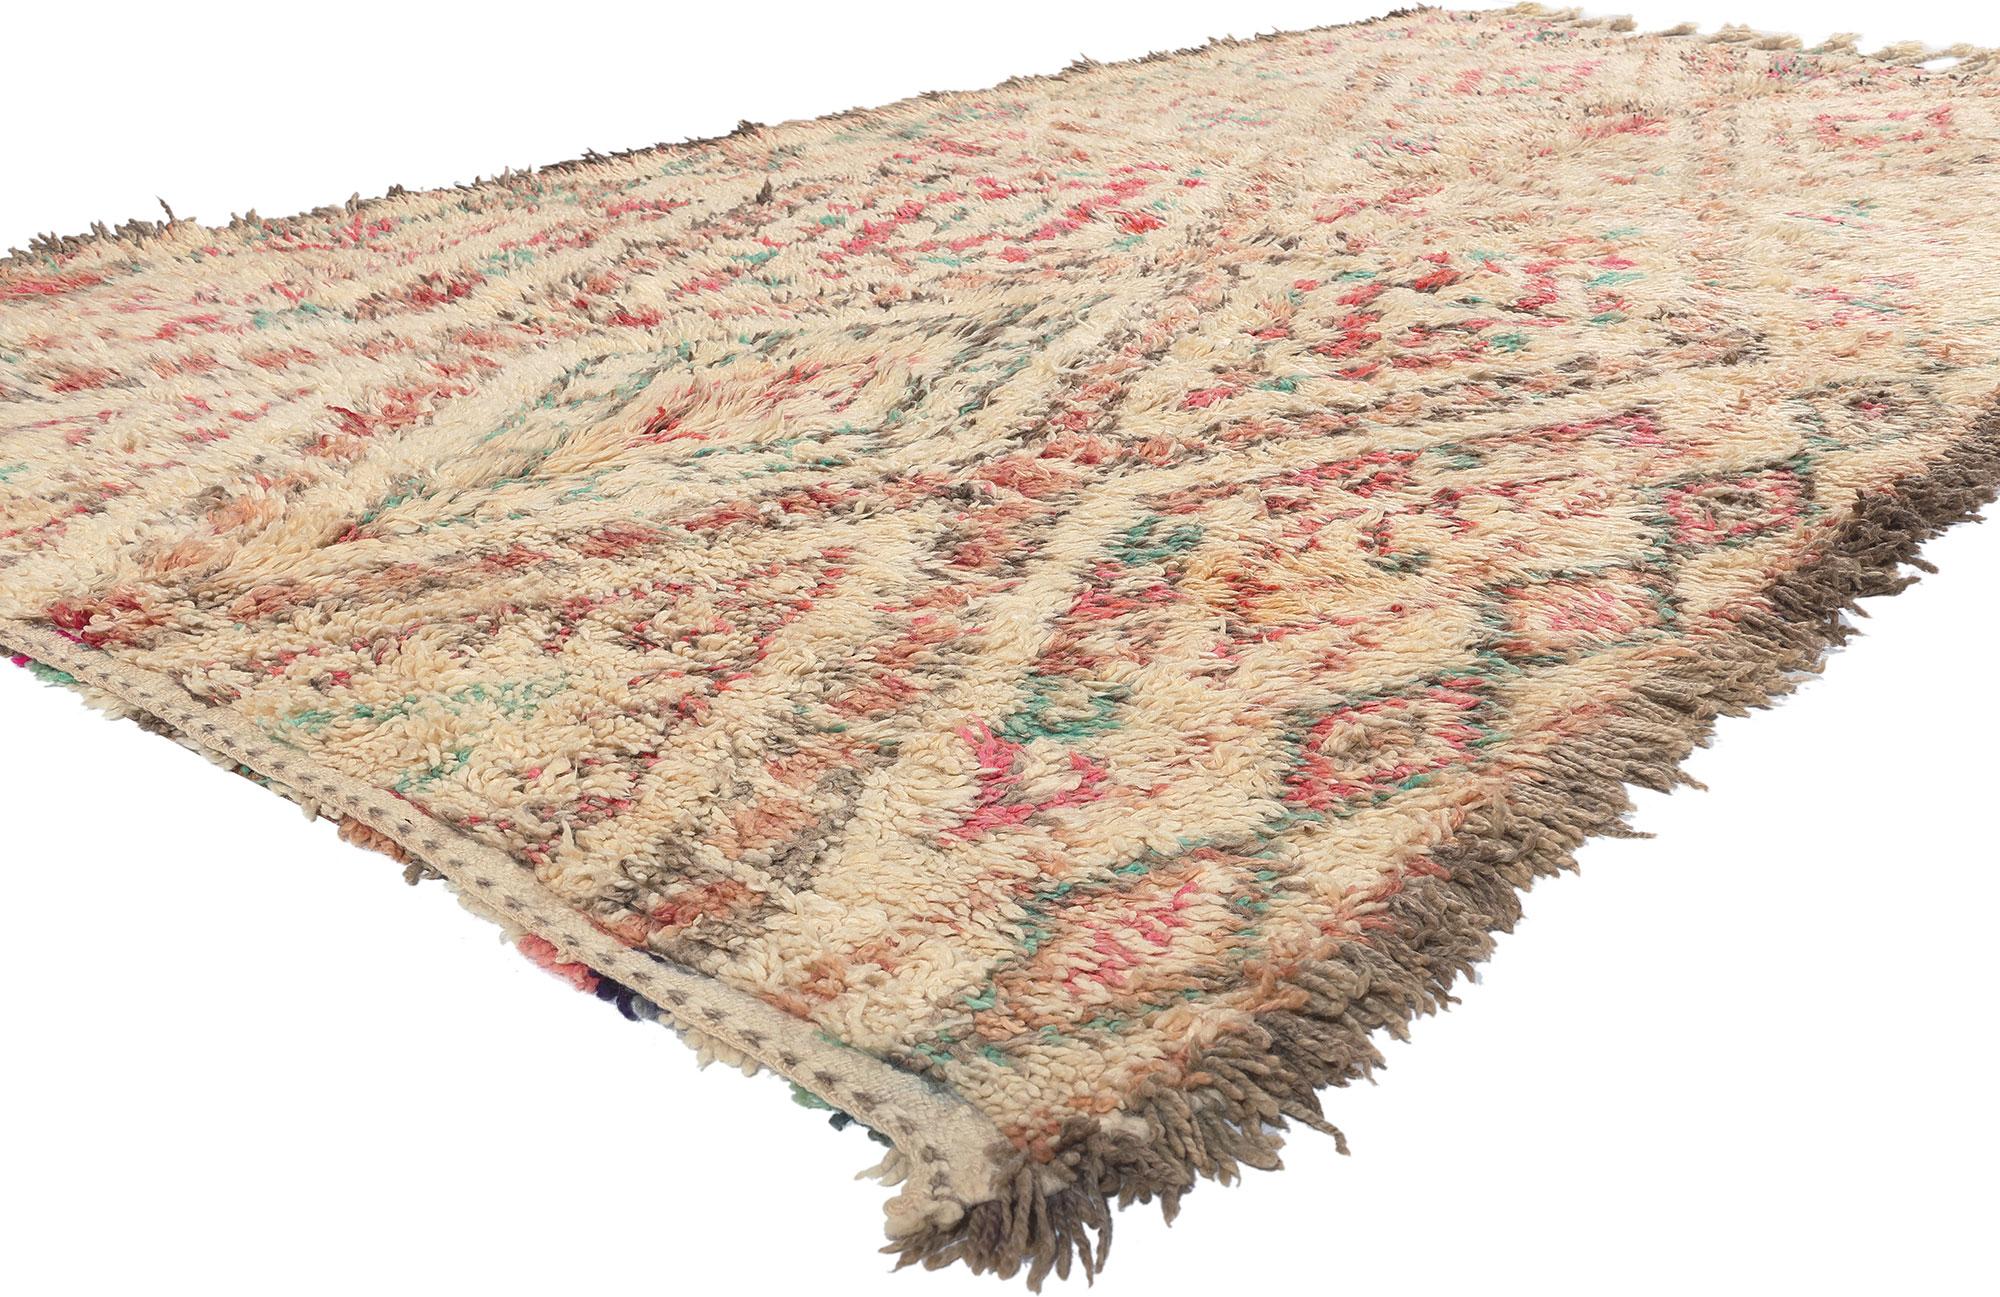 21347 Vintage Beni M'Guild Moroccan Rug, 05'09 x 10'11. Woven with the expertise of Berber women from the Ait M'Guild tribe in the mystical Atlas Mountains of Morocco, Beni Mguild rugs are revered for their masterful craftsmanship and intricate